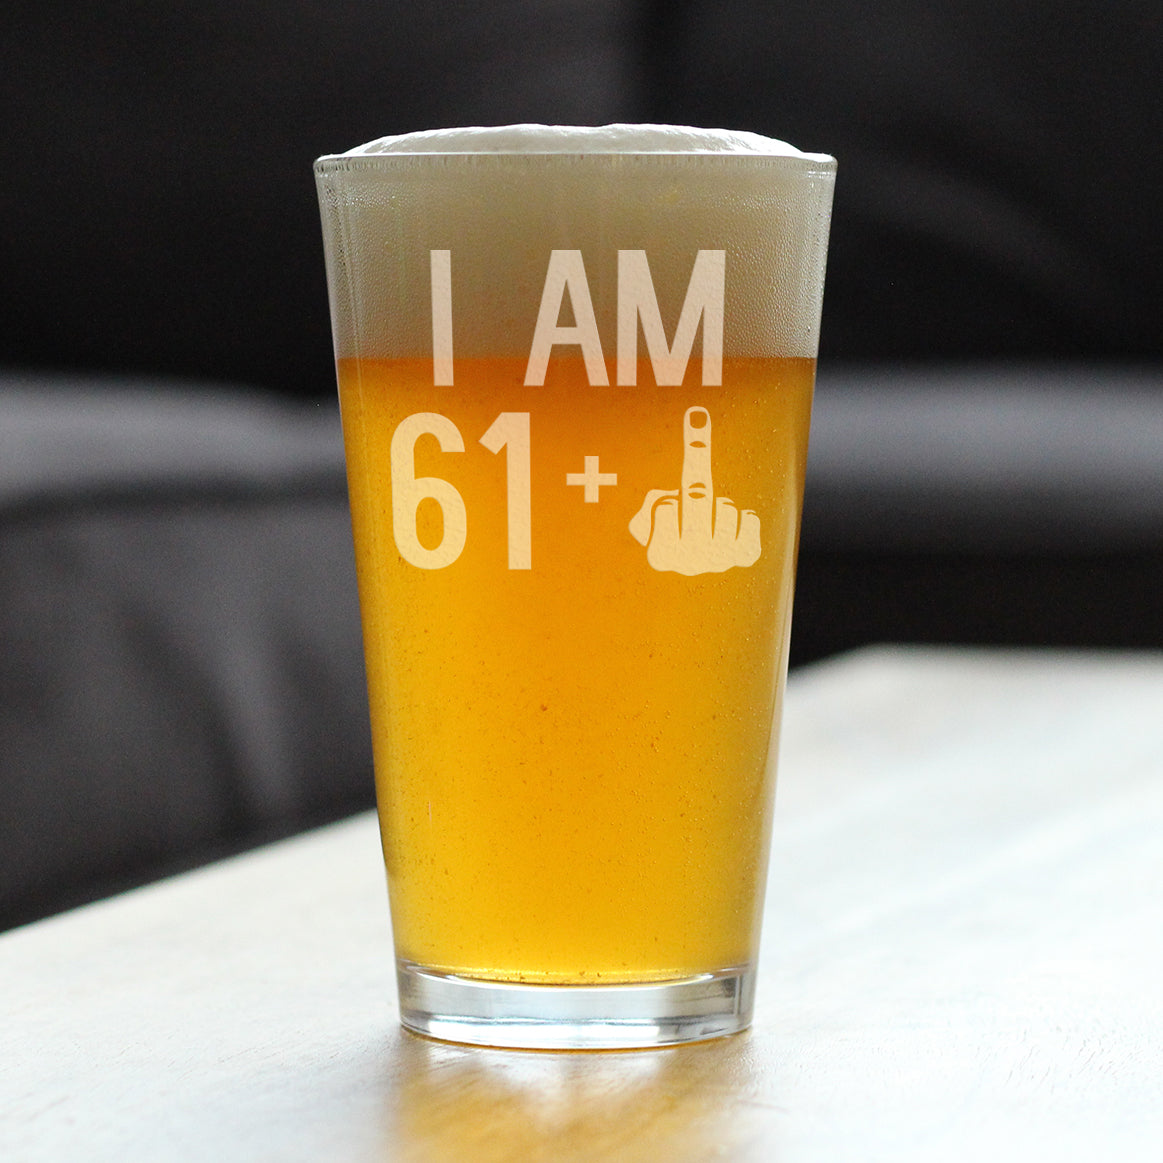 61 + 1 Middle Finger - 16 oz Pint Glass for Beer - Funny 62nd Birthday Gifts for Men Turning 62